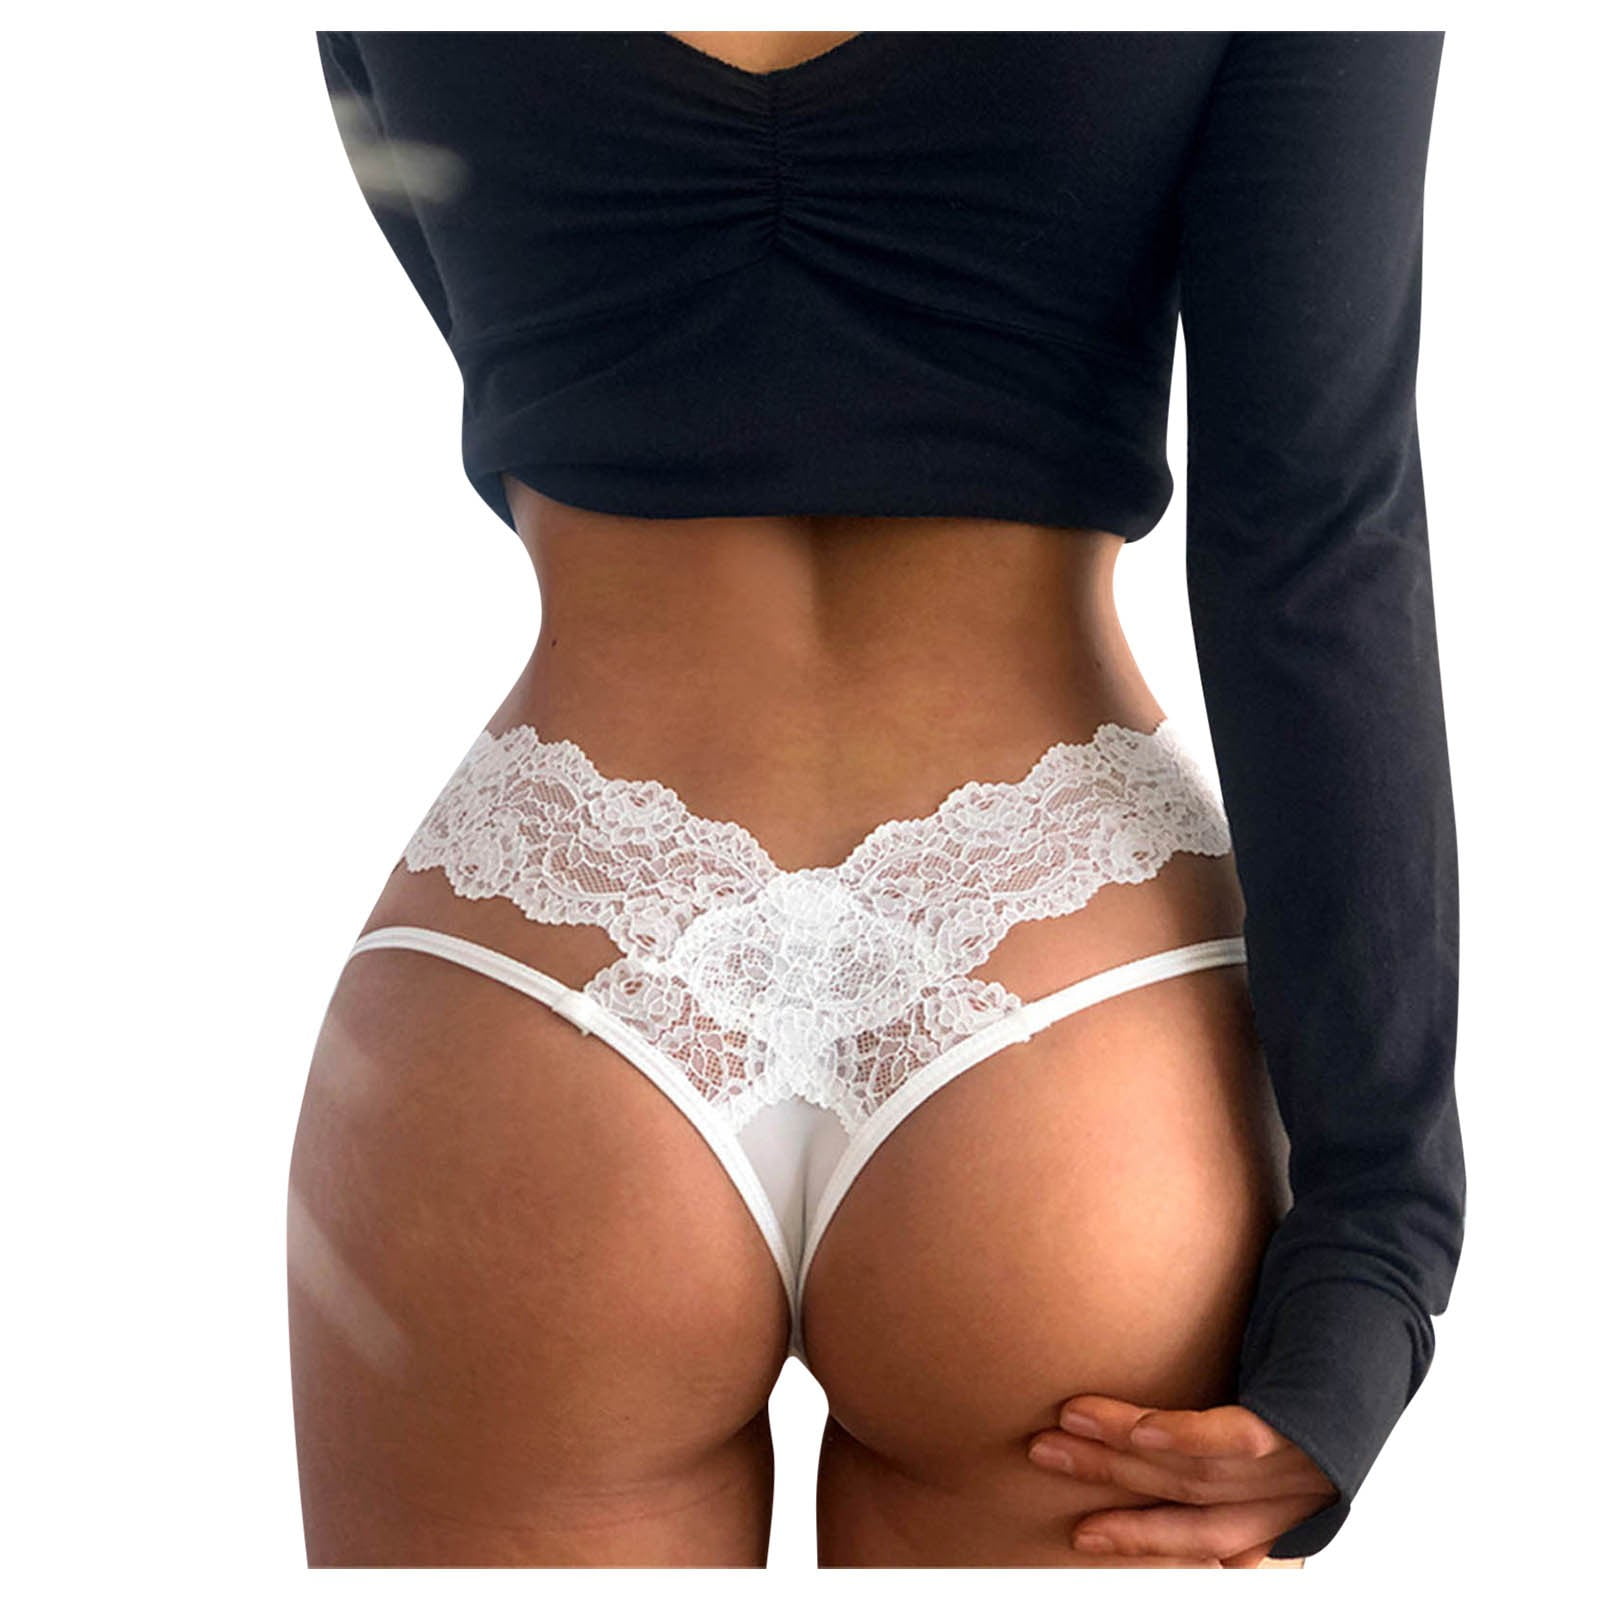 Youmylove New Hot Panties For Women Crochet Lace Lace-Up Panty Hollow Out  Underwear Lingeries Chemise Nightie